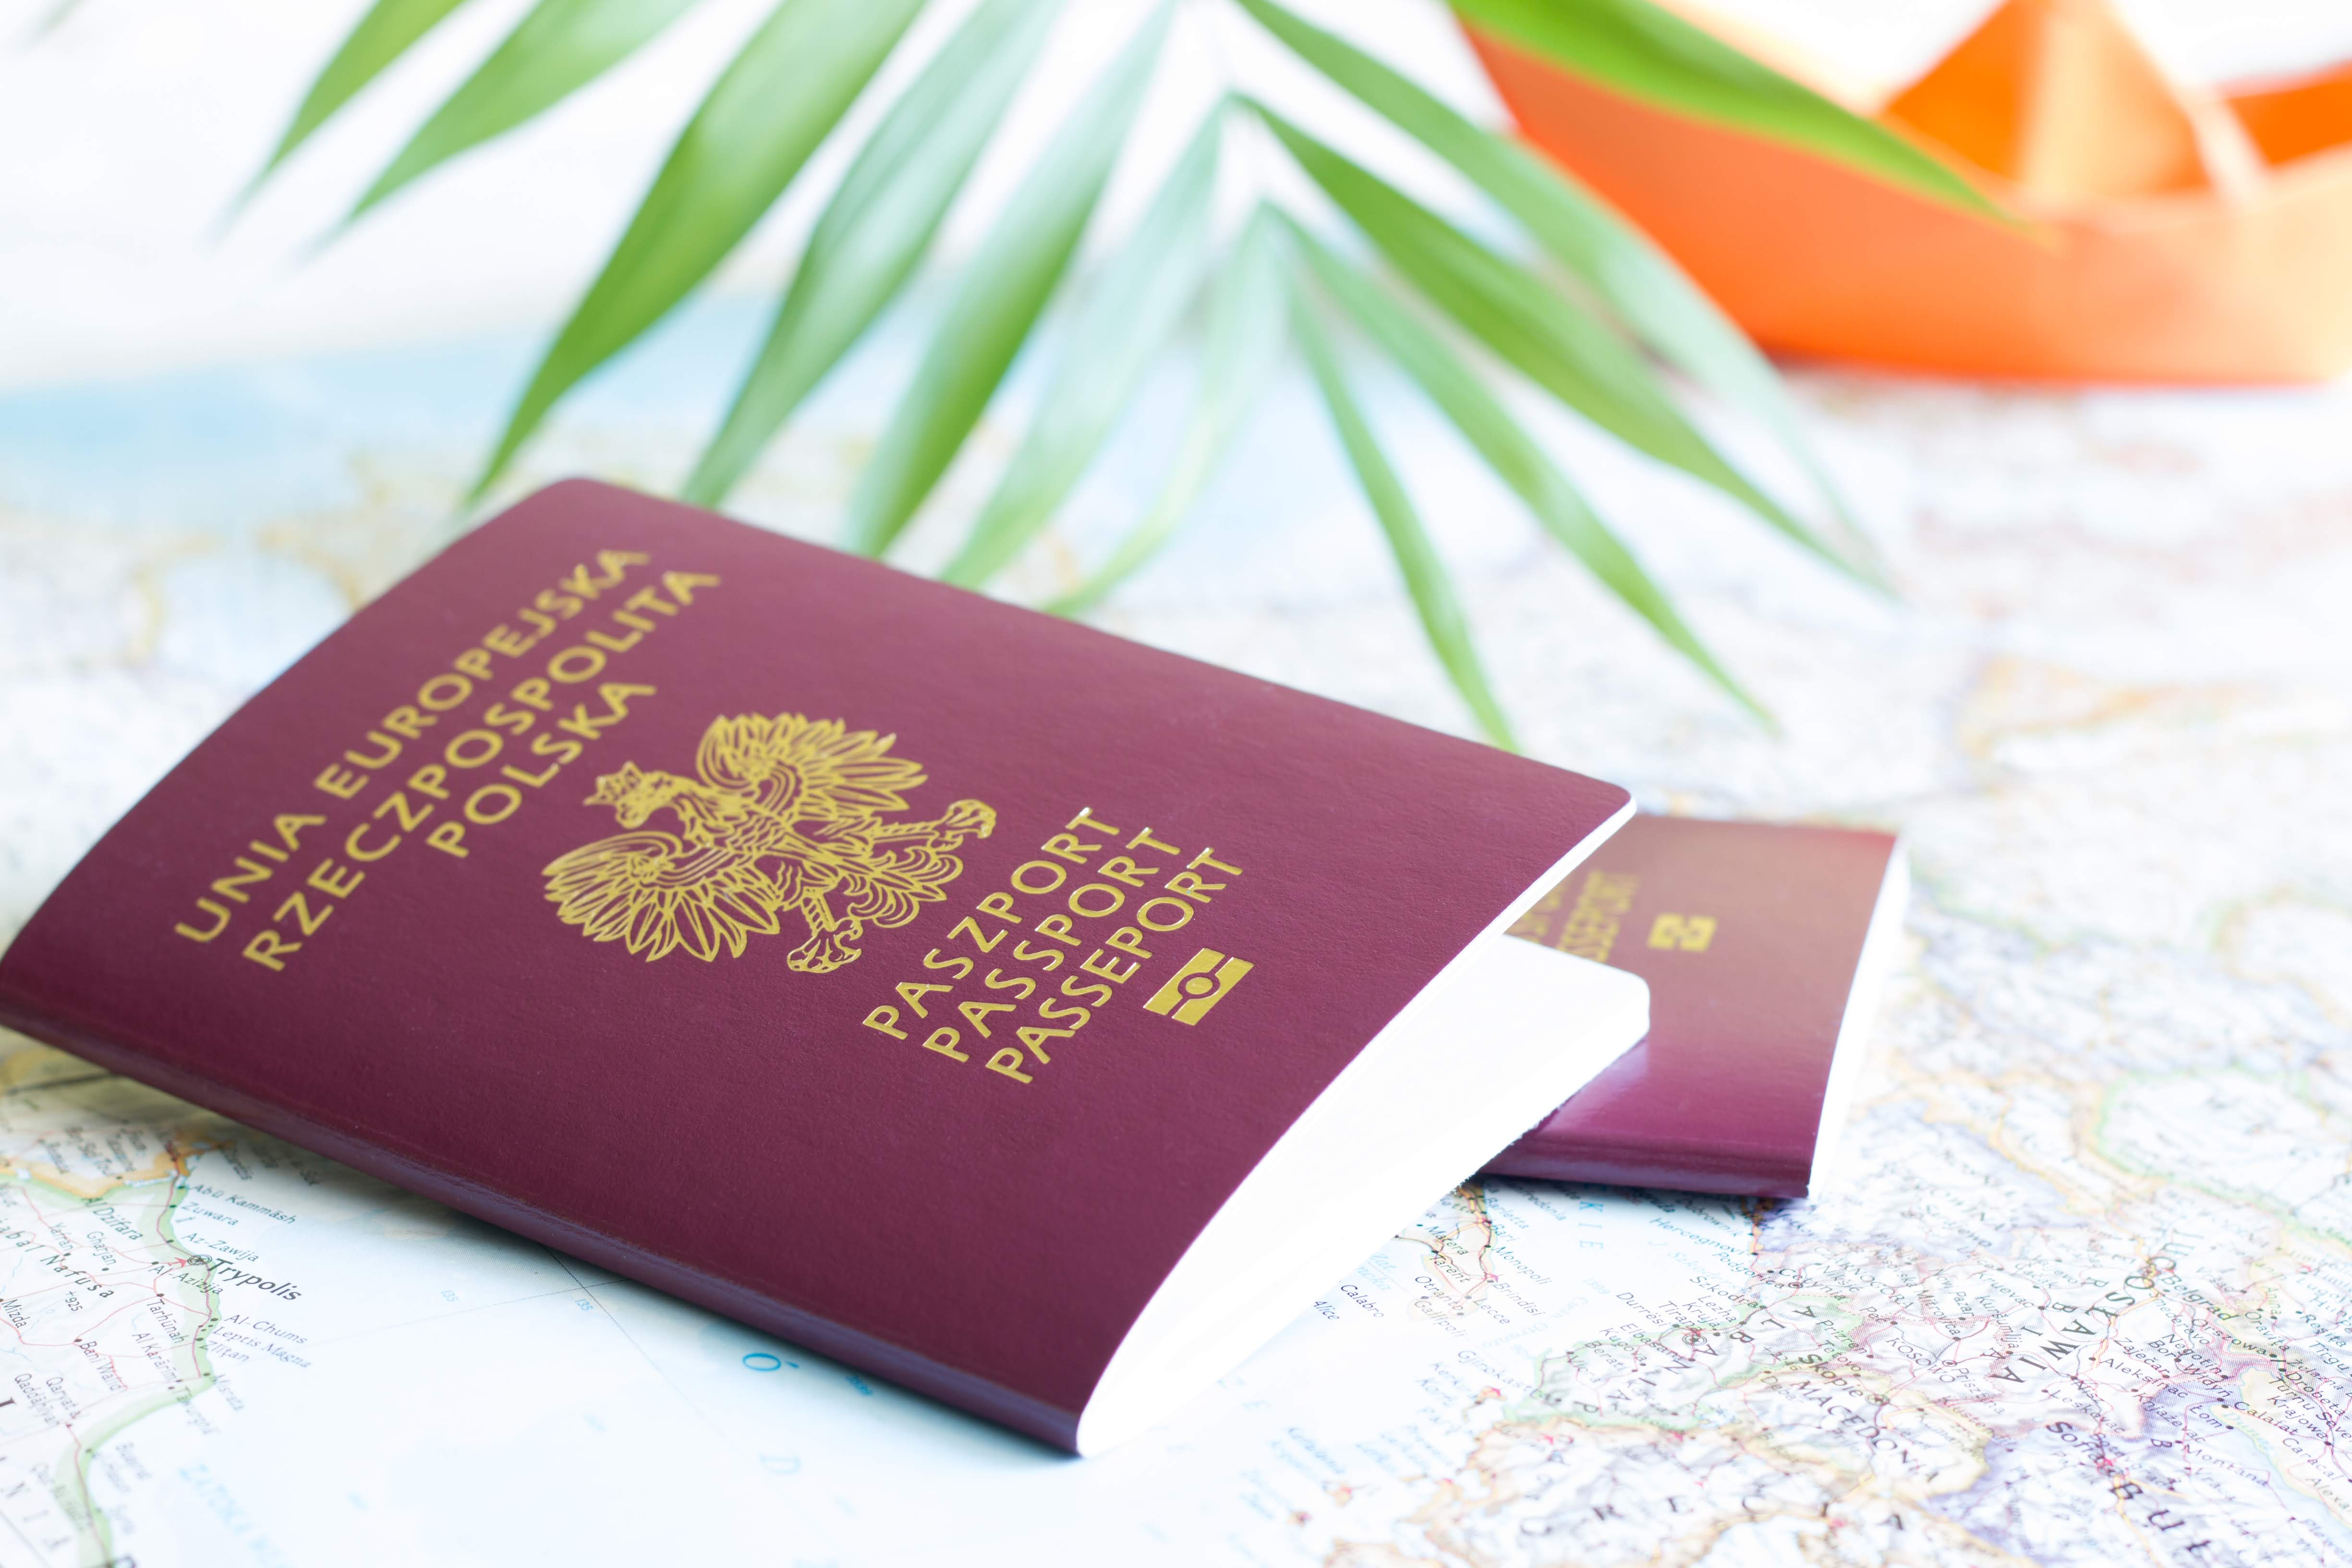 Super Urgent Vietnam Visa for Polish Citizens: How to Get Your Visa in Just 1 Hour